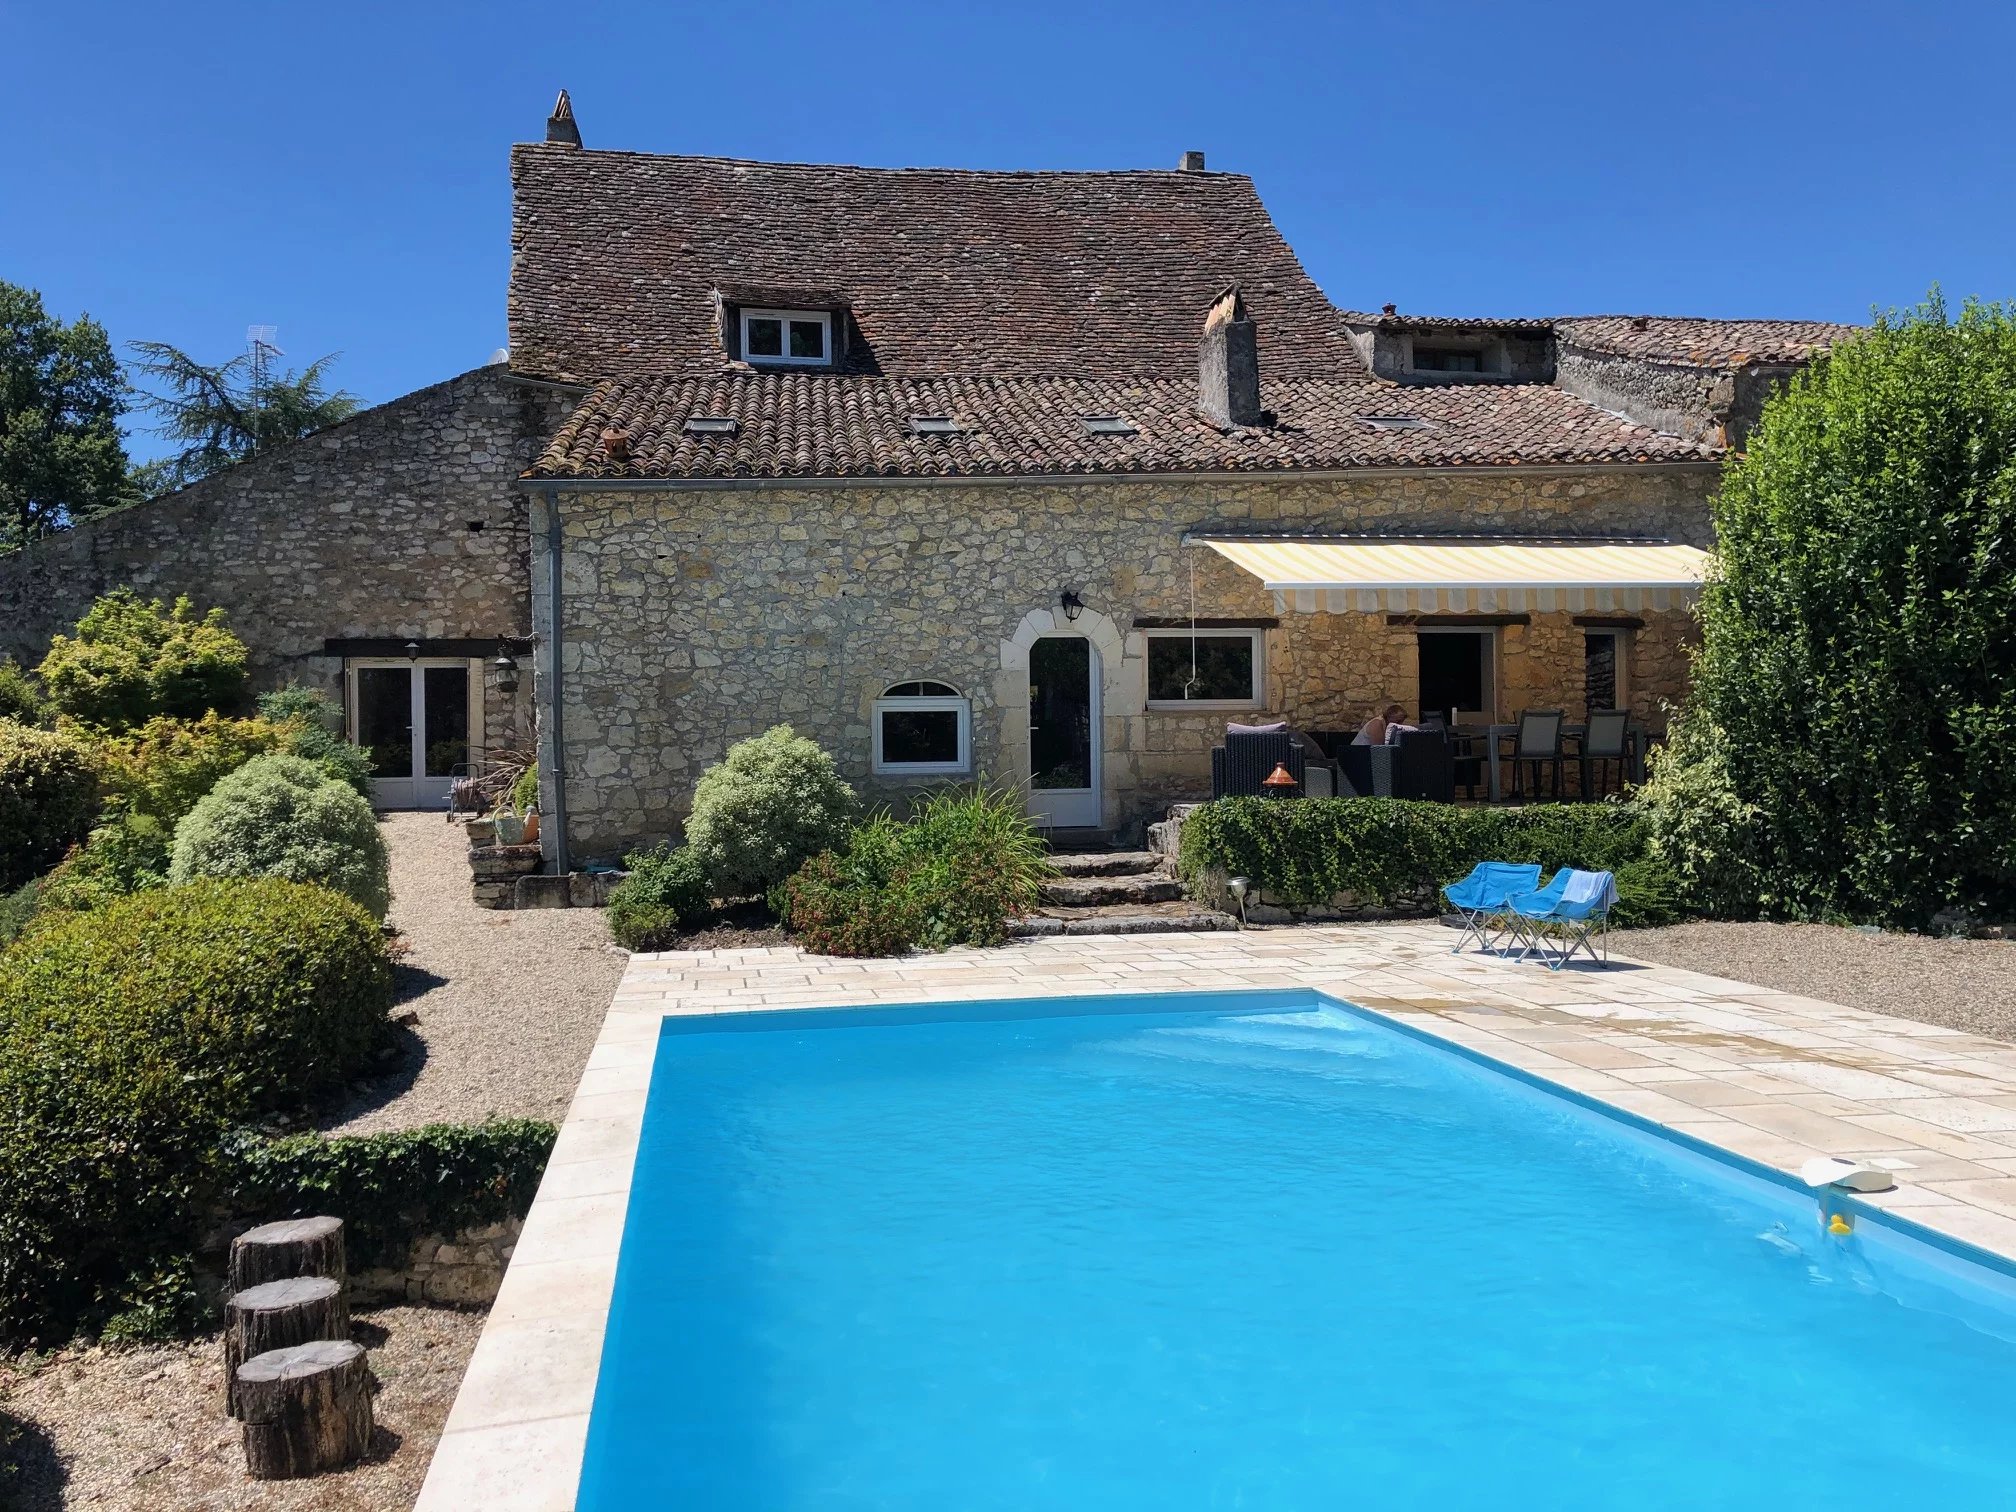 16th century 4 bed character house with stunning views and a pool